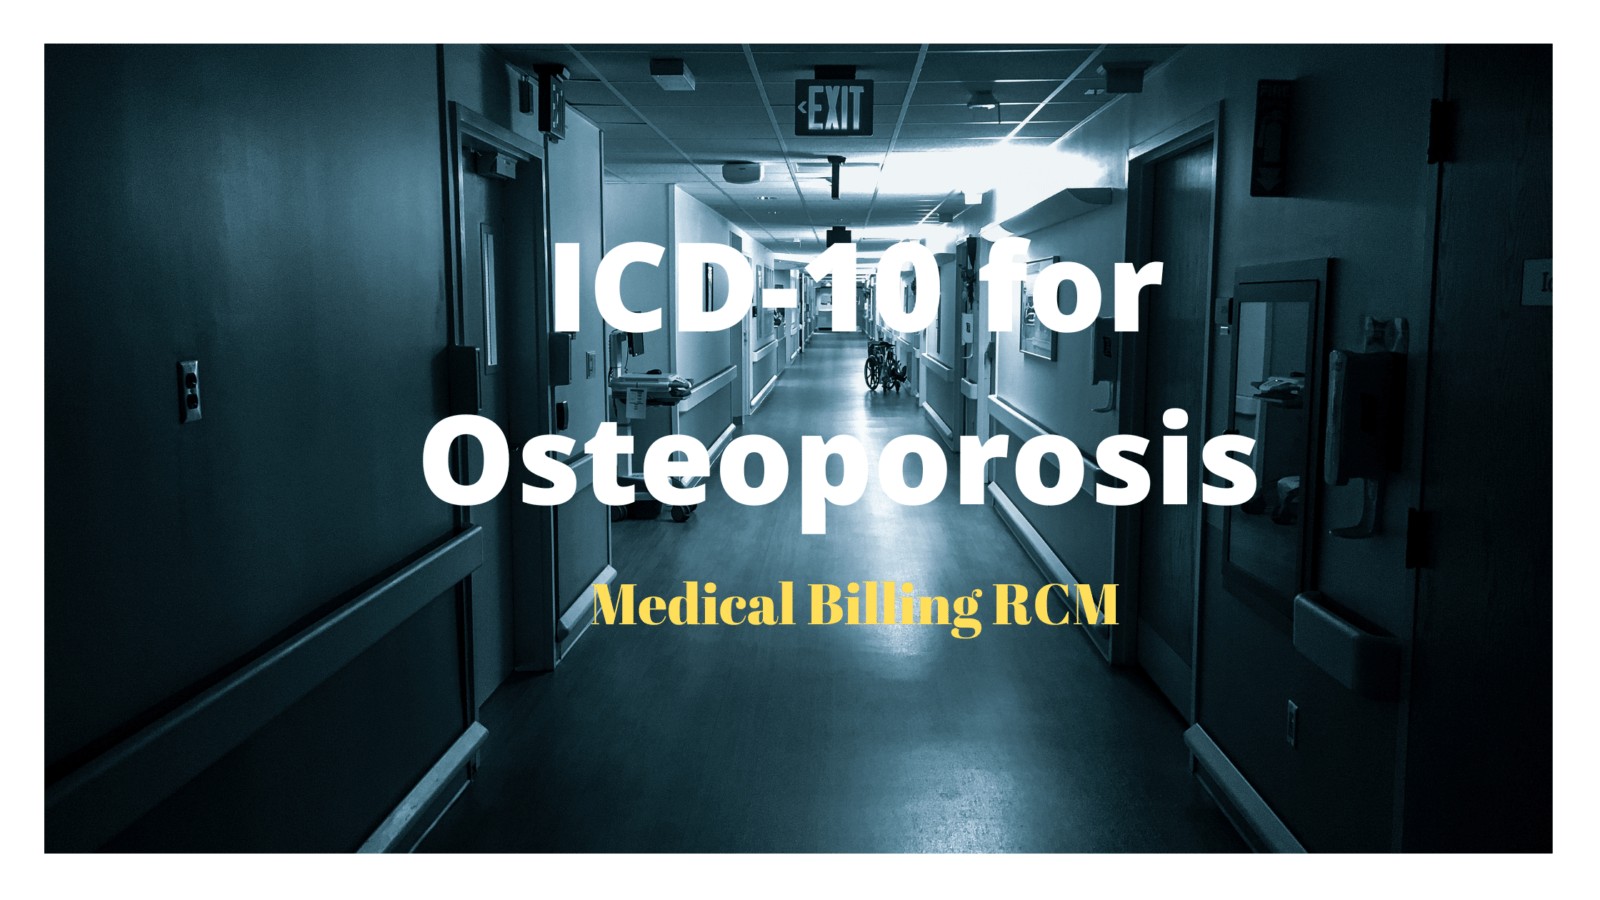 ICD-10 for osteoporosis